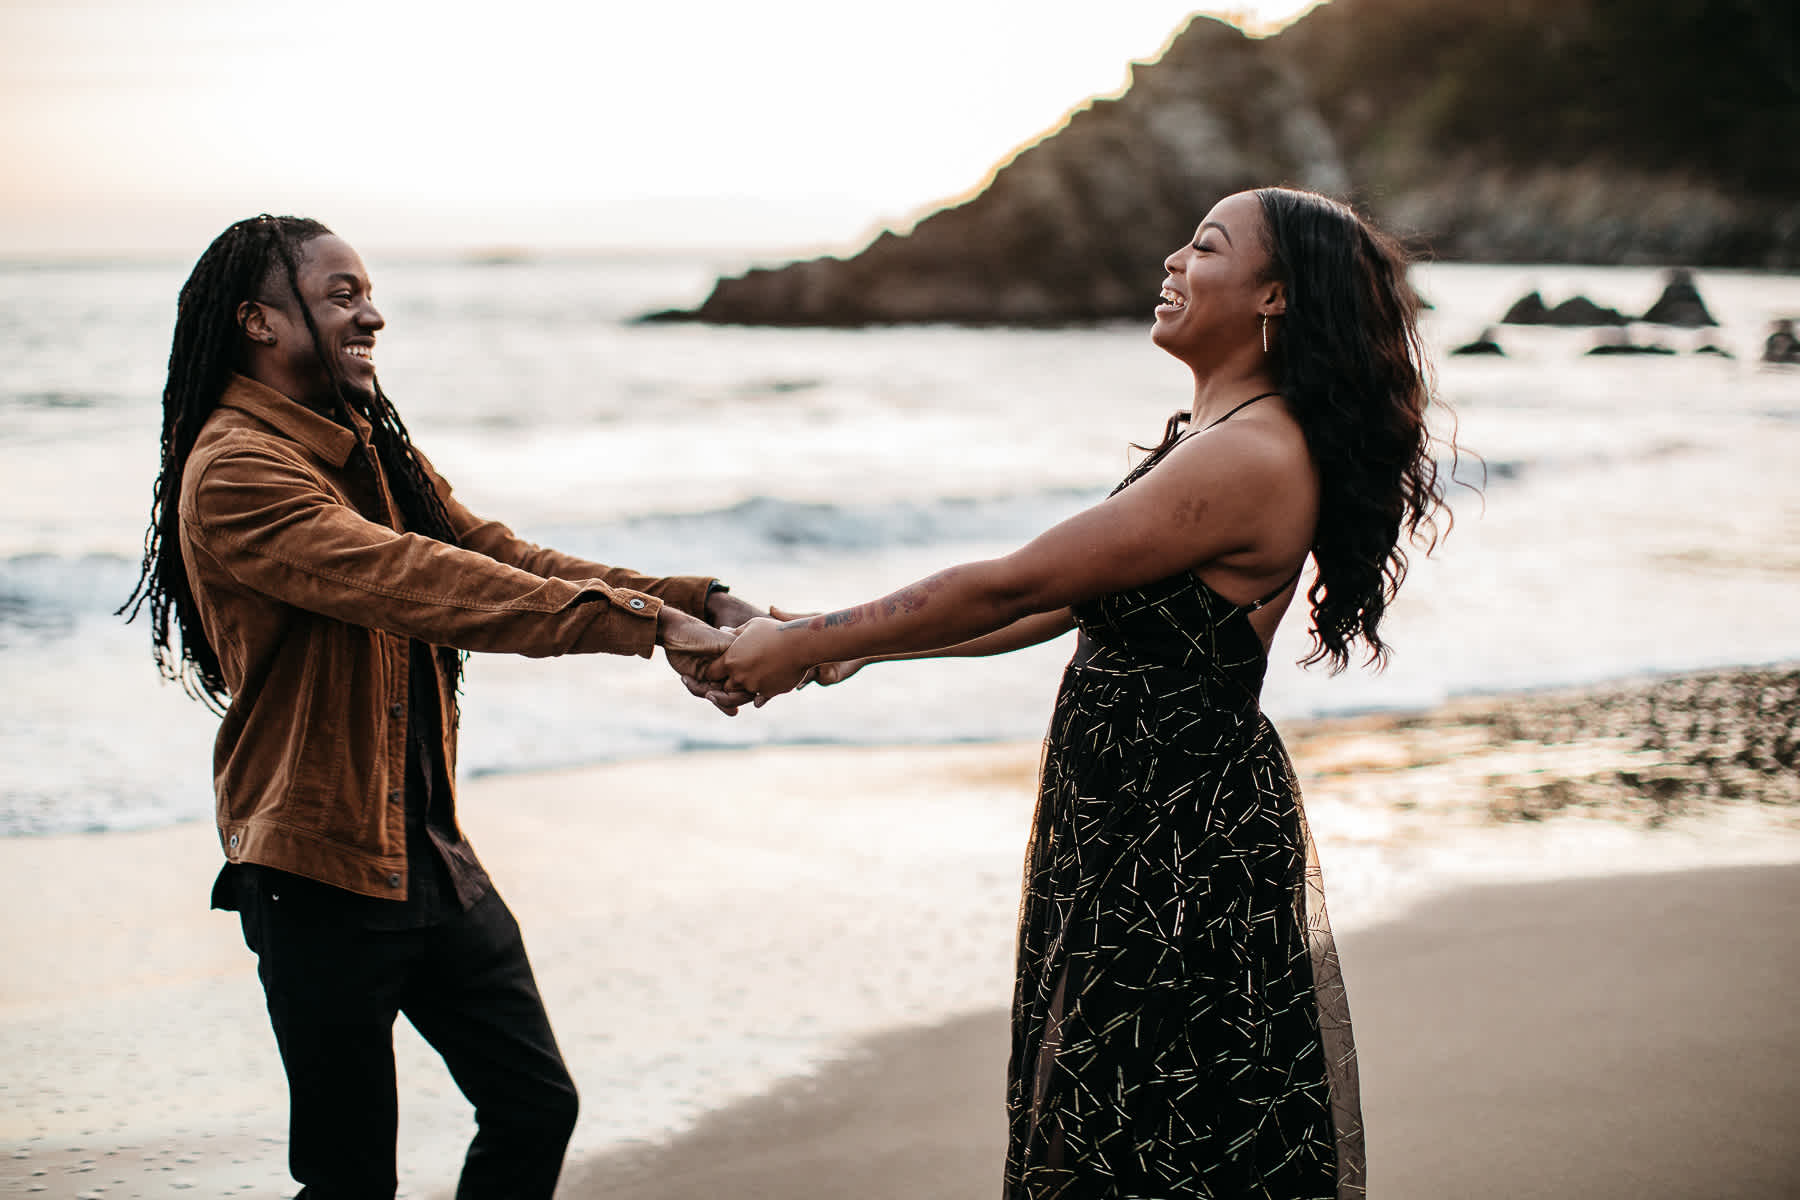 muir-beach-ca-spring-lifestyle-engagement-session-41